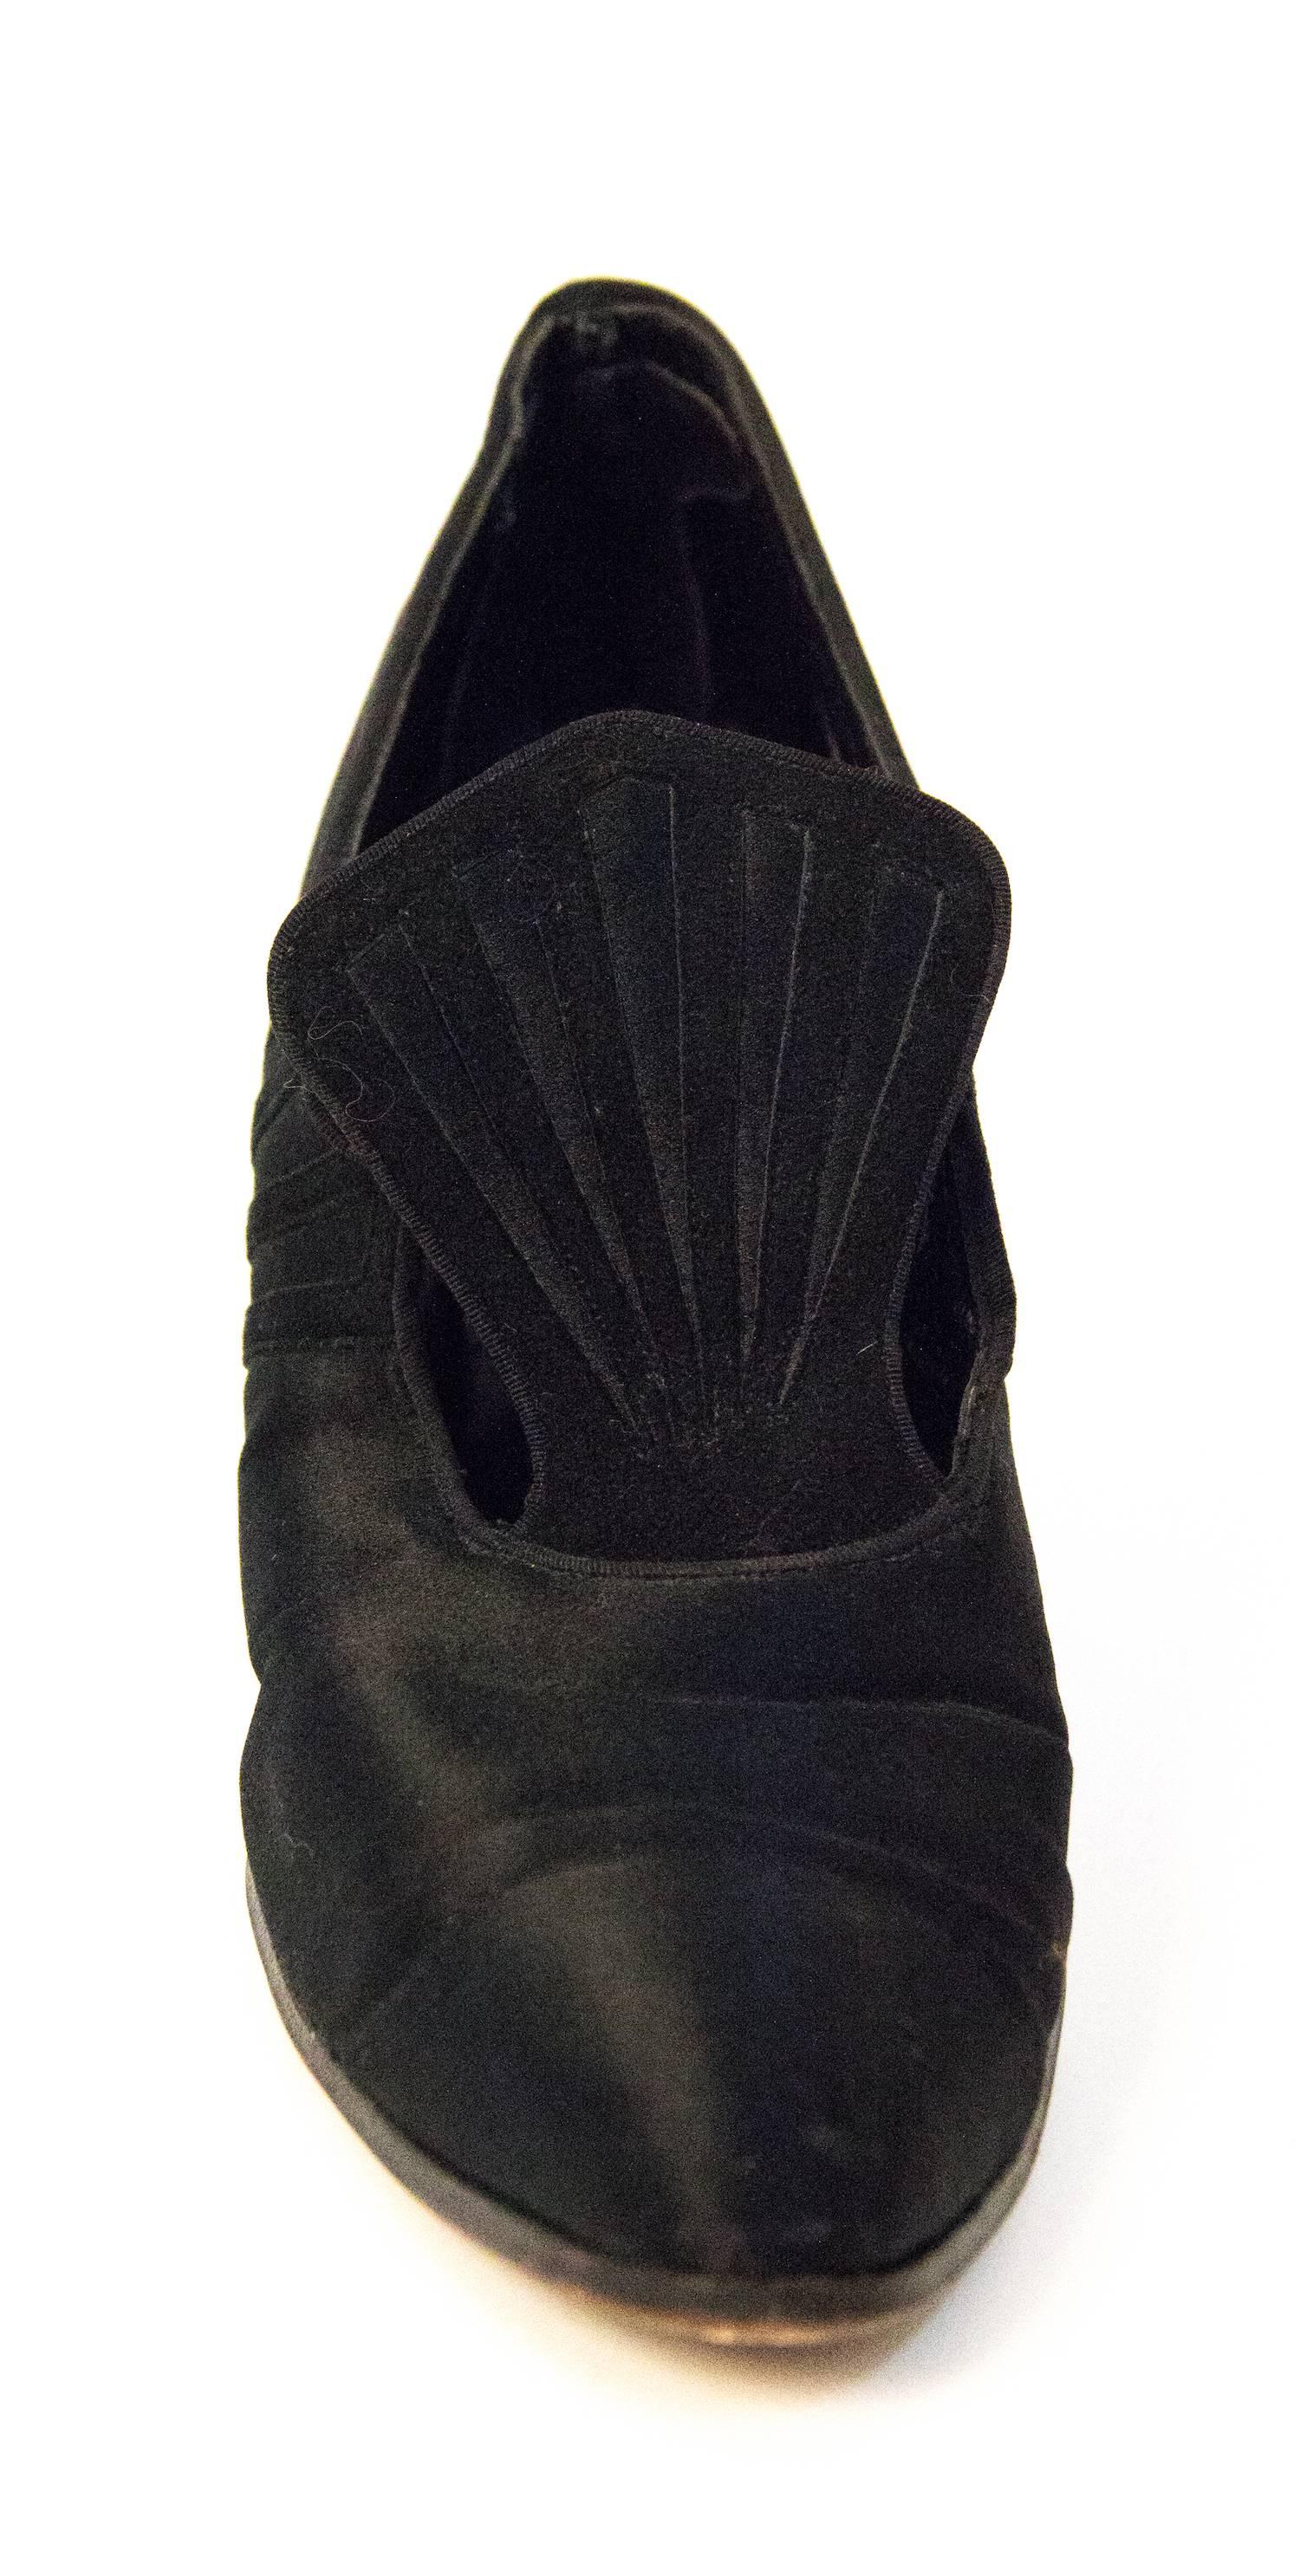 Edwardian black silk heels with suede cutout details. Button closure. Lined in thin leather. Leather soles. 

Measurements:
Insole: 10 inches 
Palm of the Foot : 2 3/4 inches
Heel: 2 7/8 inches 
